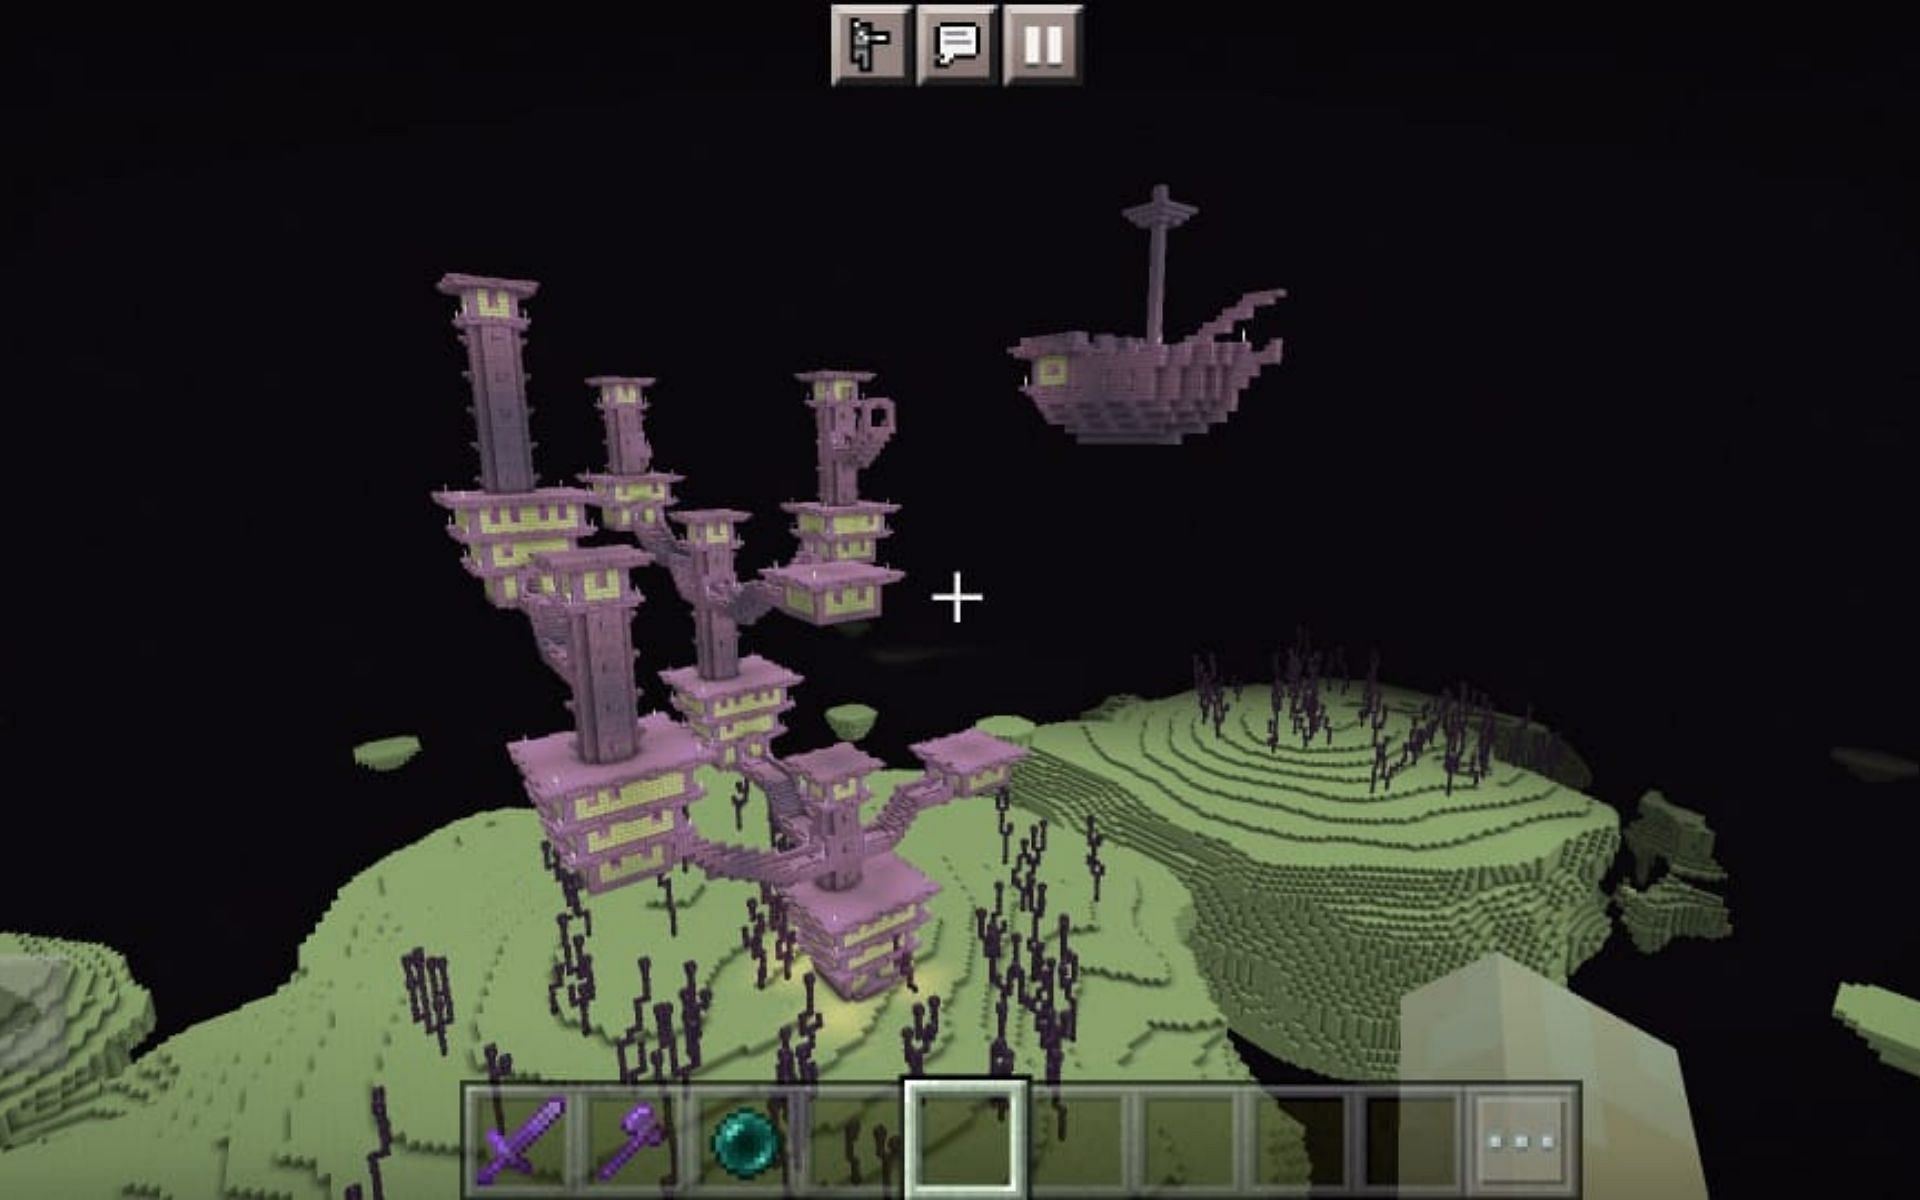 After gamers find an End City, they can start exploring it (Image via Mojang)